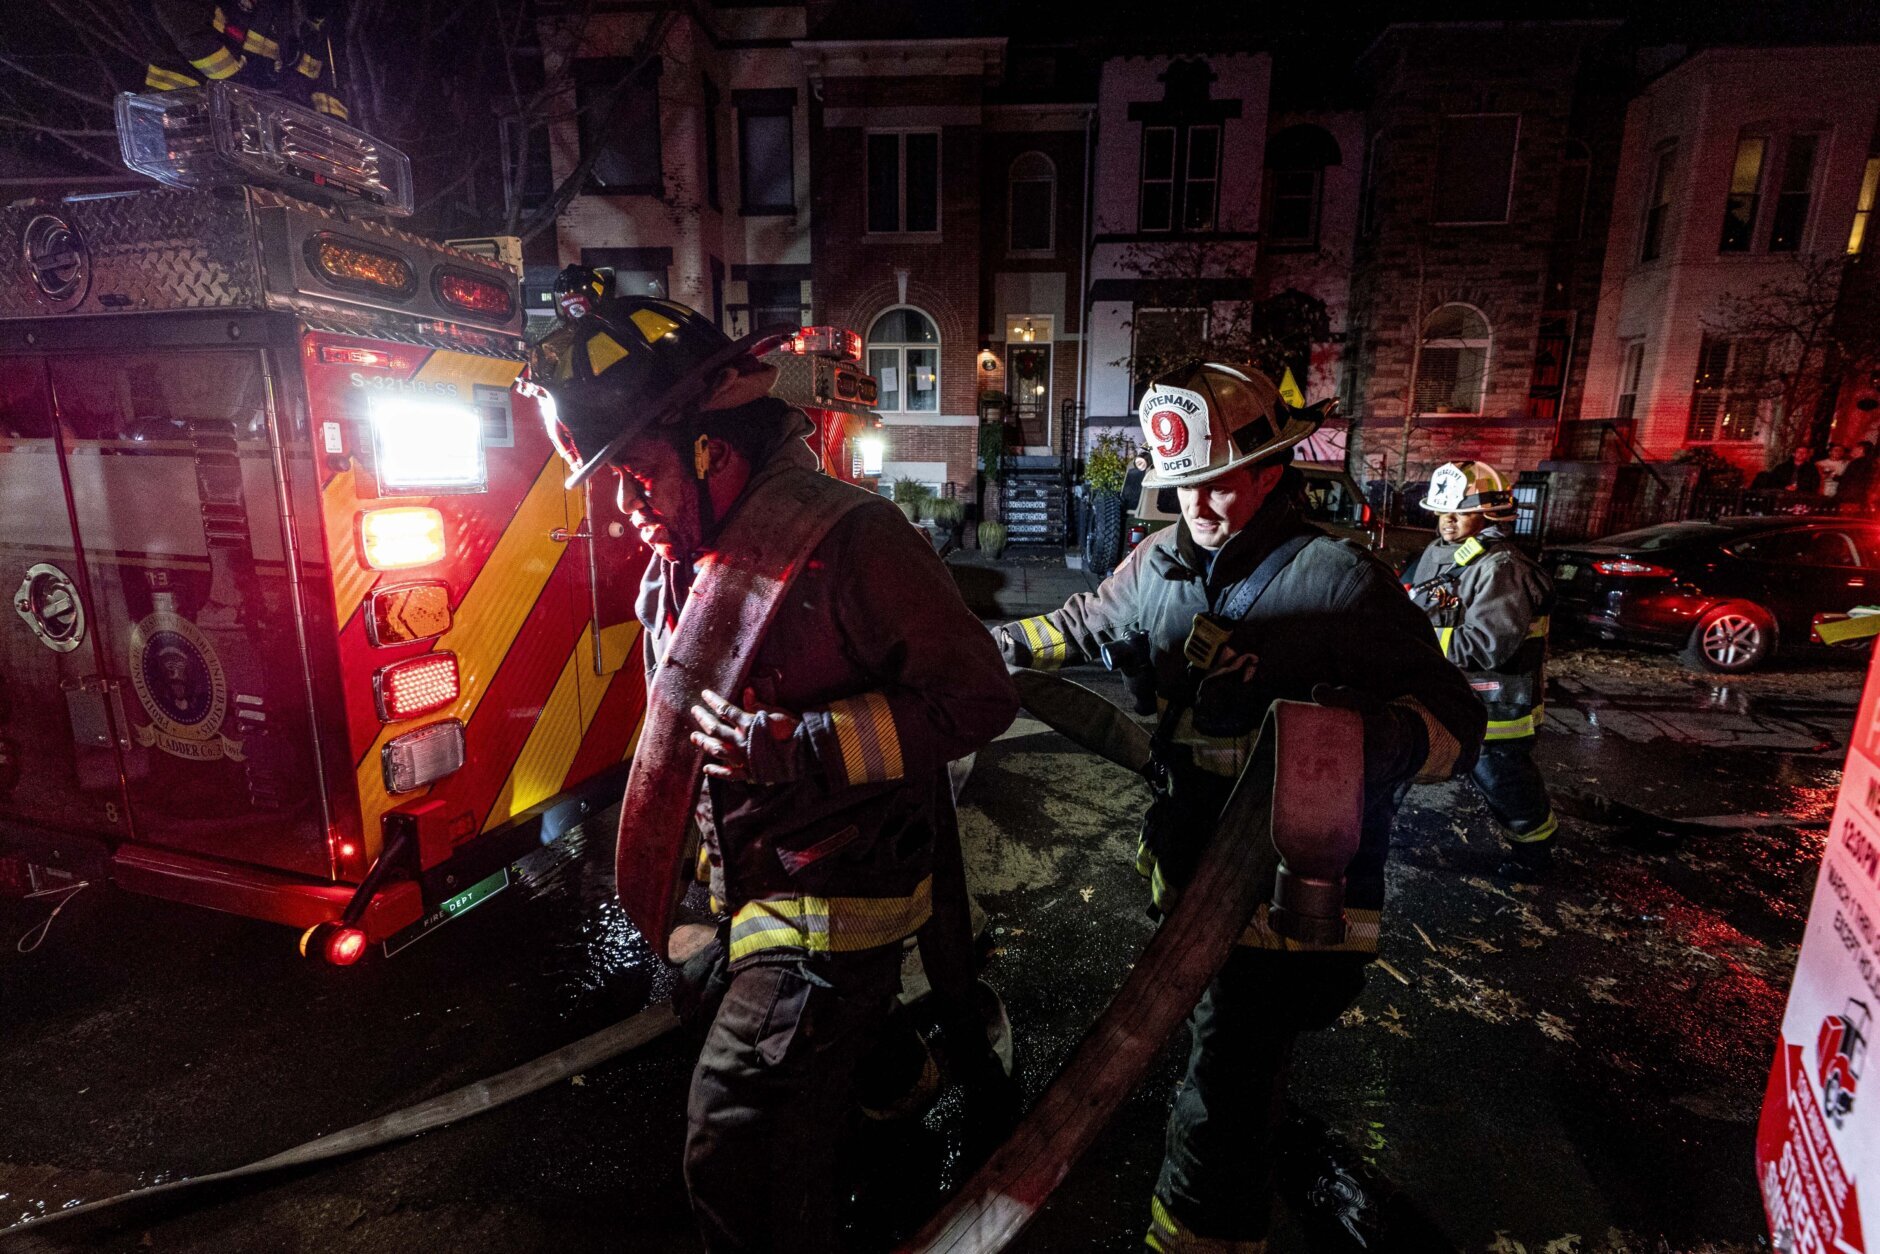 Firefighters battle a two alarm fire that started in a former fire station, Old Engine Company No. 12, now a landmark along North Capitol Street, in the Bloomingdale neighborhood of Washington, Friday, Dec. 15, 2023. (AP Photo/Andrew Harnik)